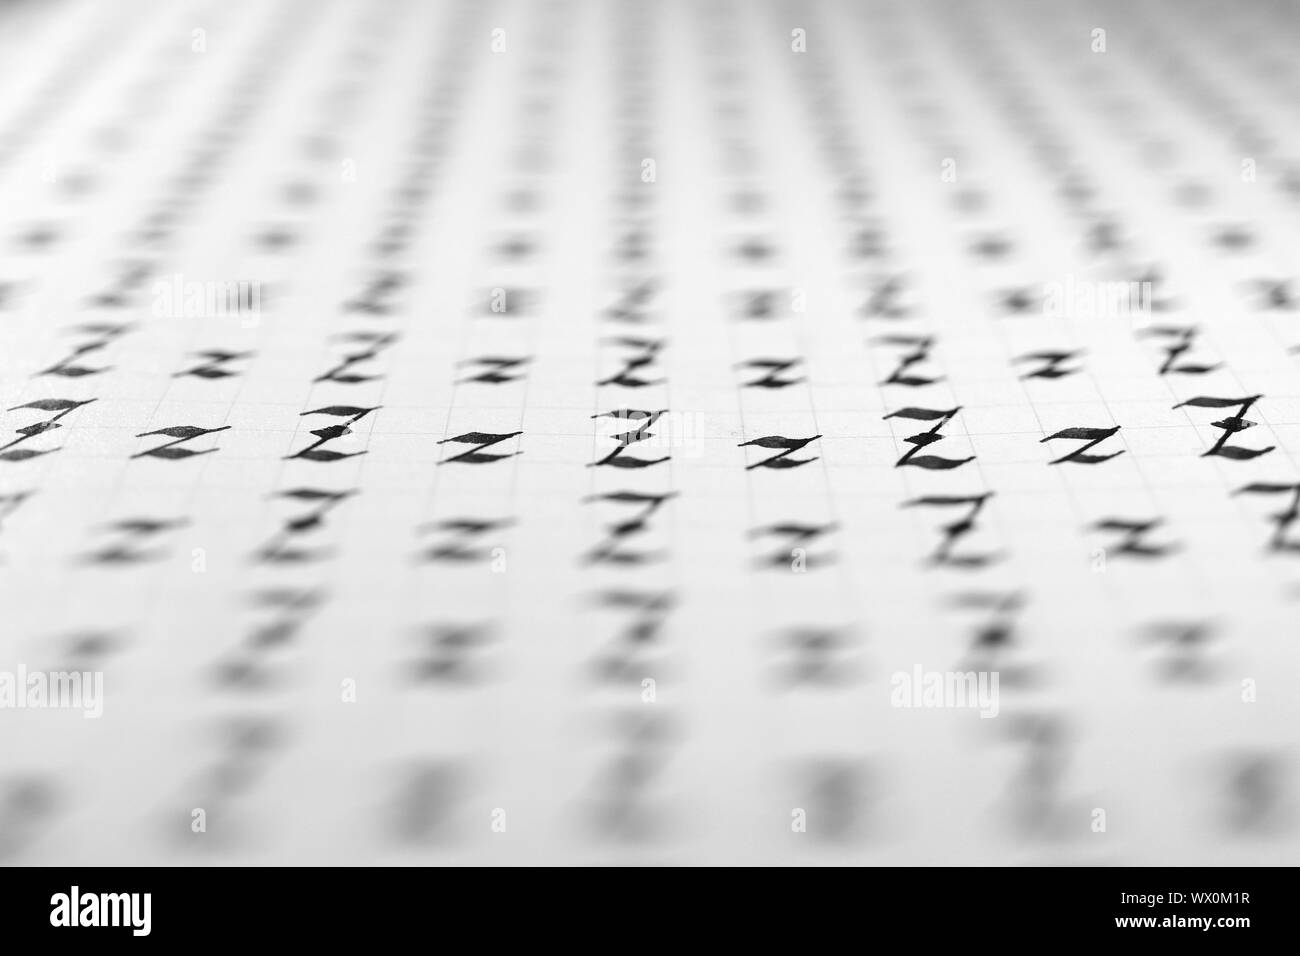 Calligraphy black and white letters Z background. Lettering practice writing worksheet. Handwriting symbol filling pattern. Calligraphic letter z lear Stock Photo